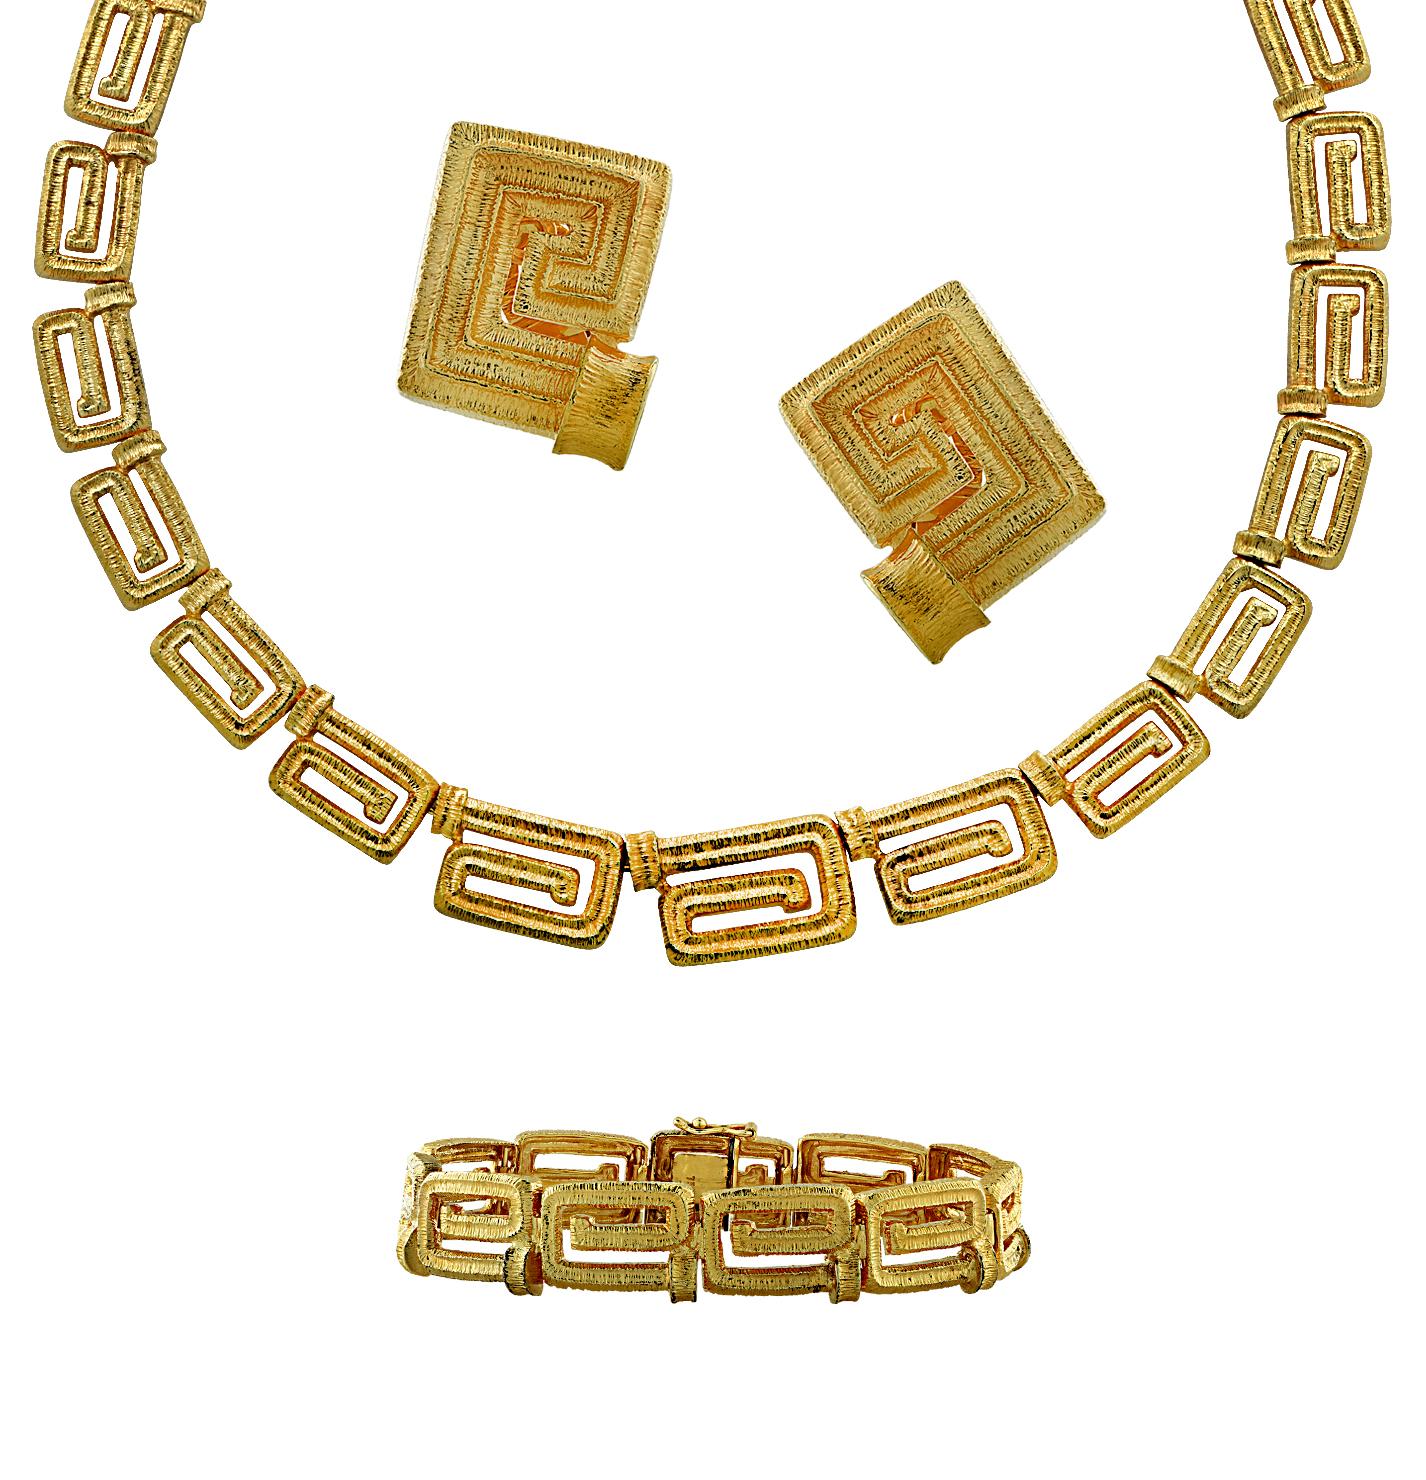 Stunning Greek Key jewelry suite featuring a necklace, bracelet and earrings crafted in 18 karat yellow gold. The necklace measures 17 inches in length and 11.8 mm in width. It closes with a hidden box clasp and safety lever. The bracelet measures